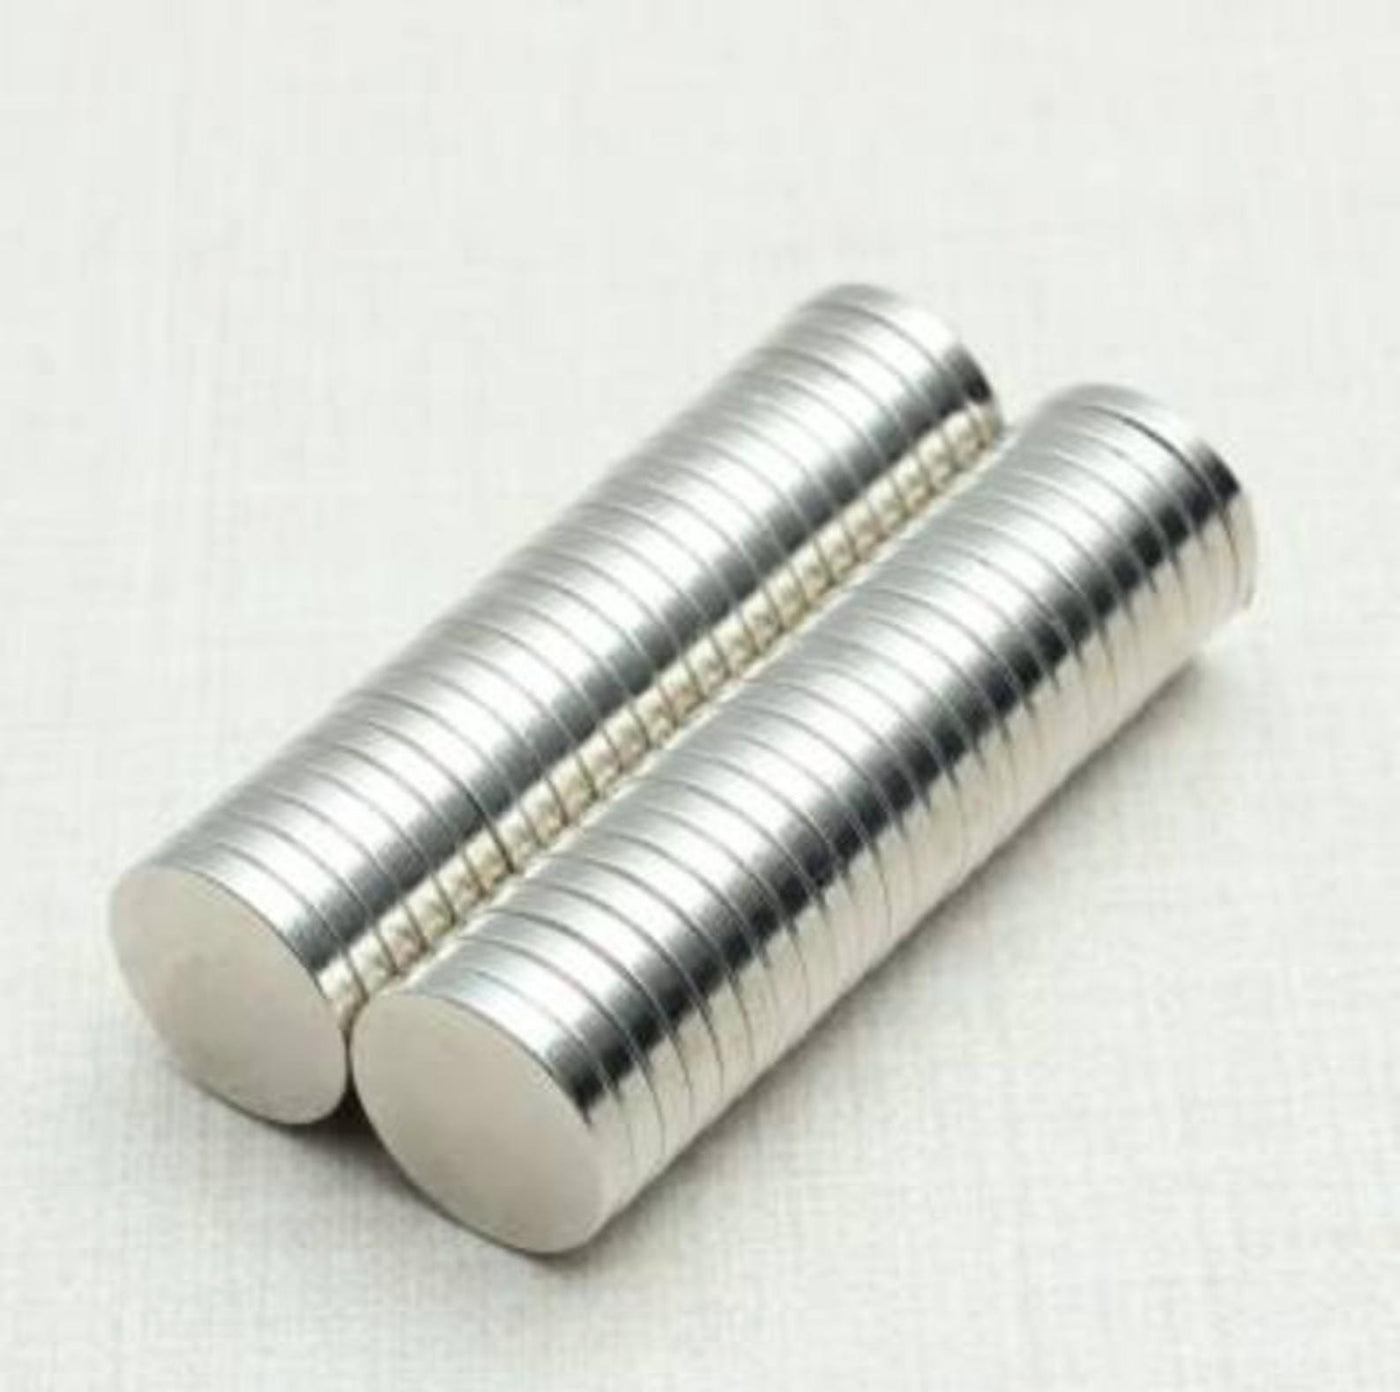 Strong neodymium disk magnets